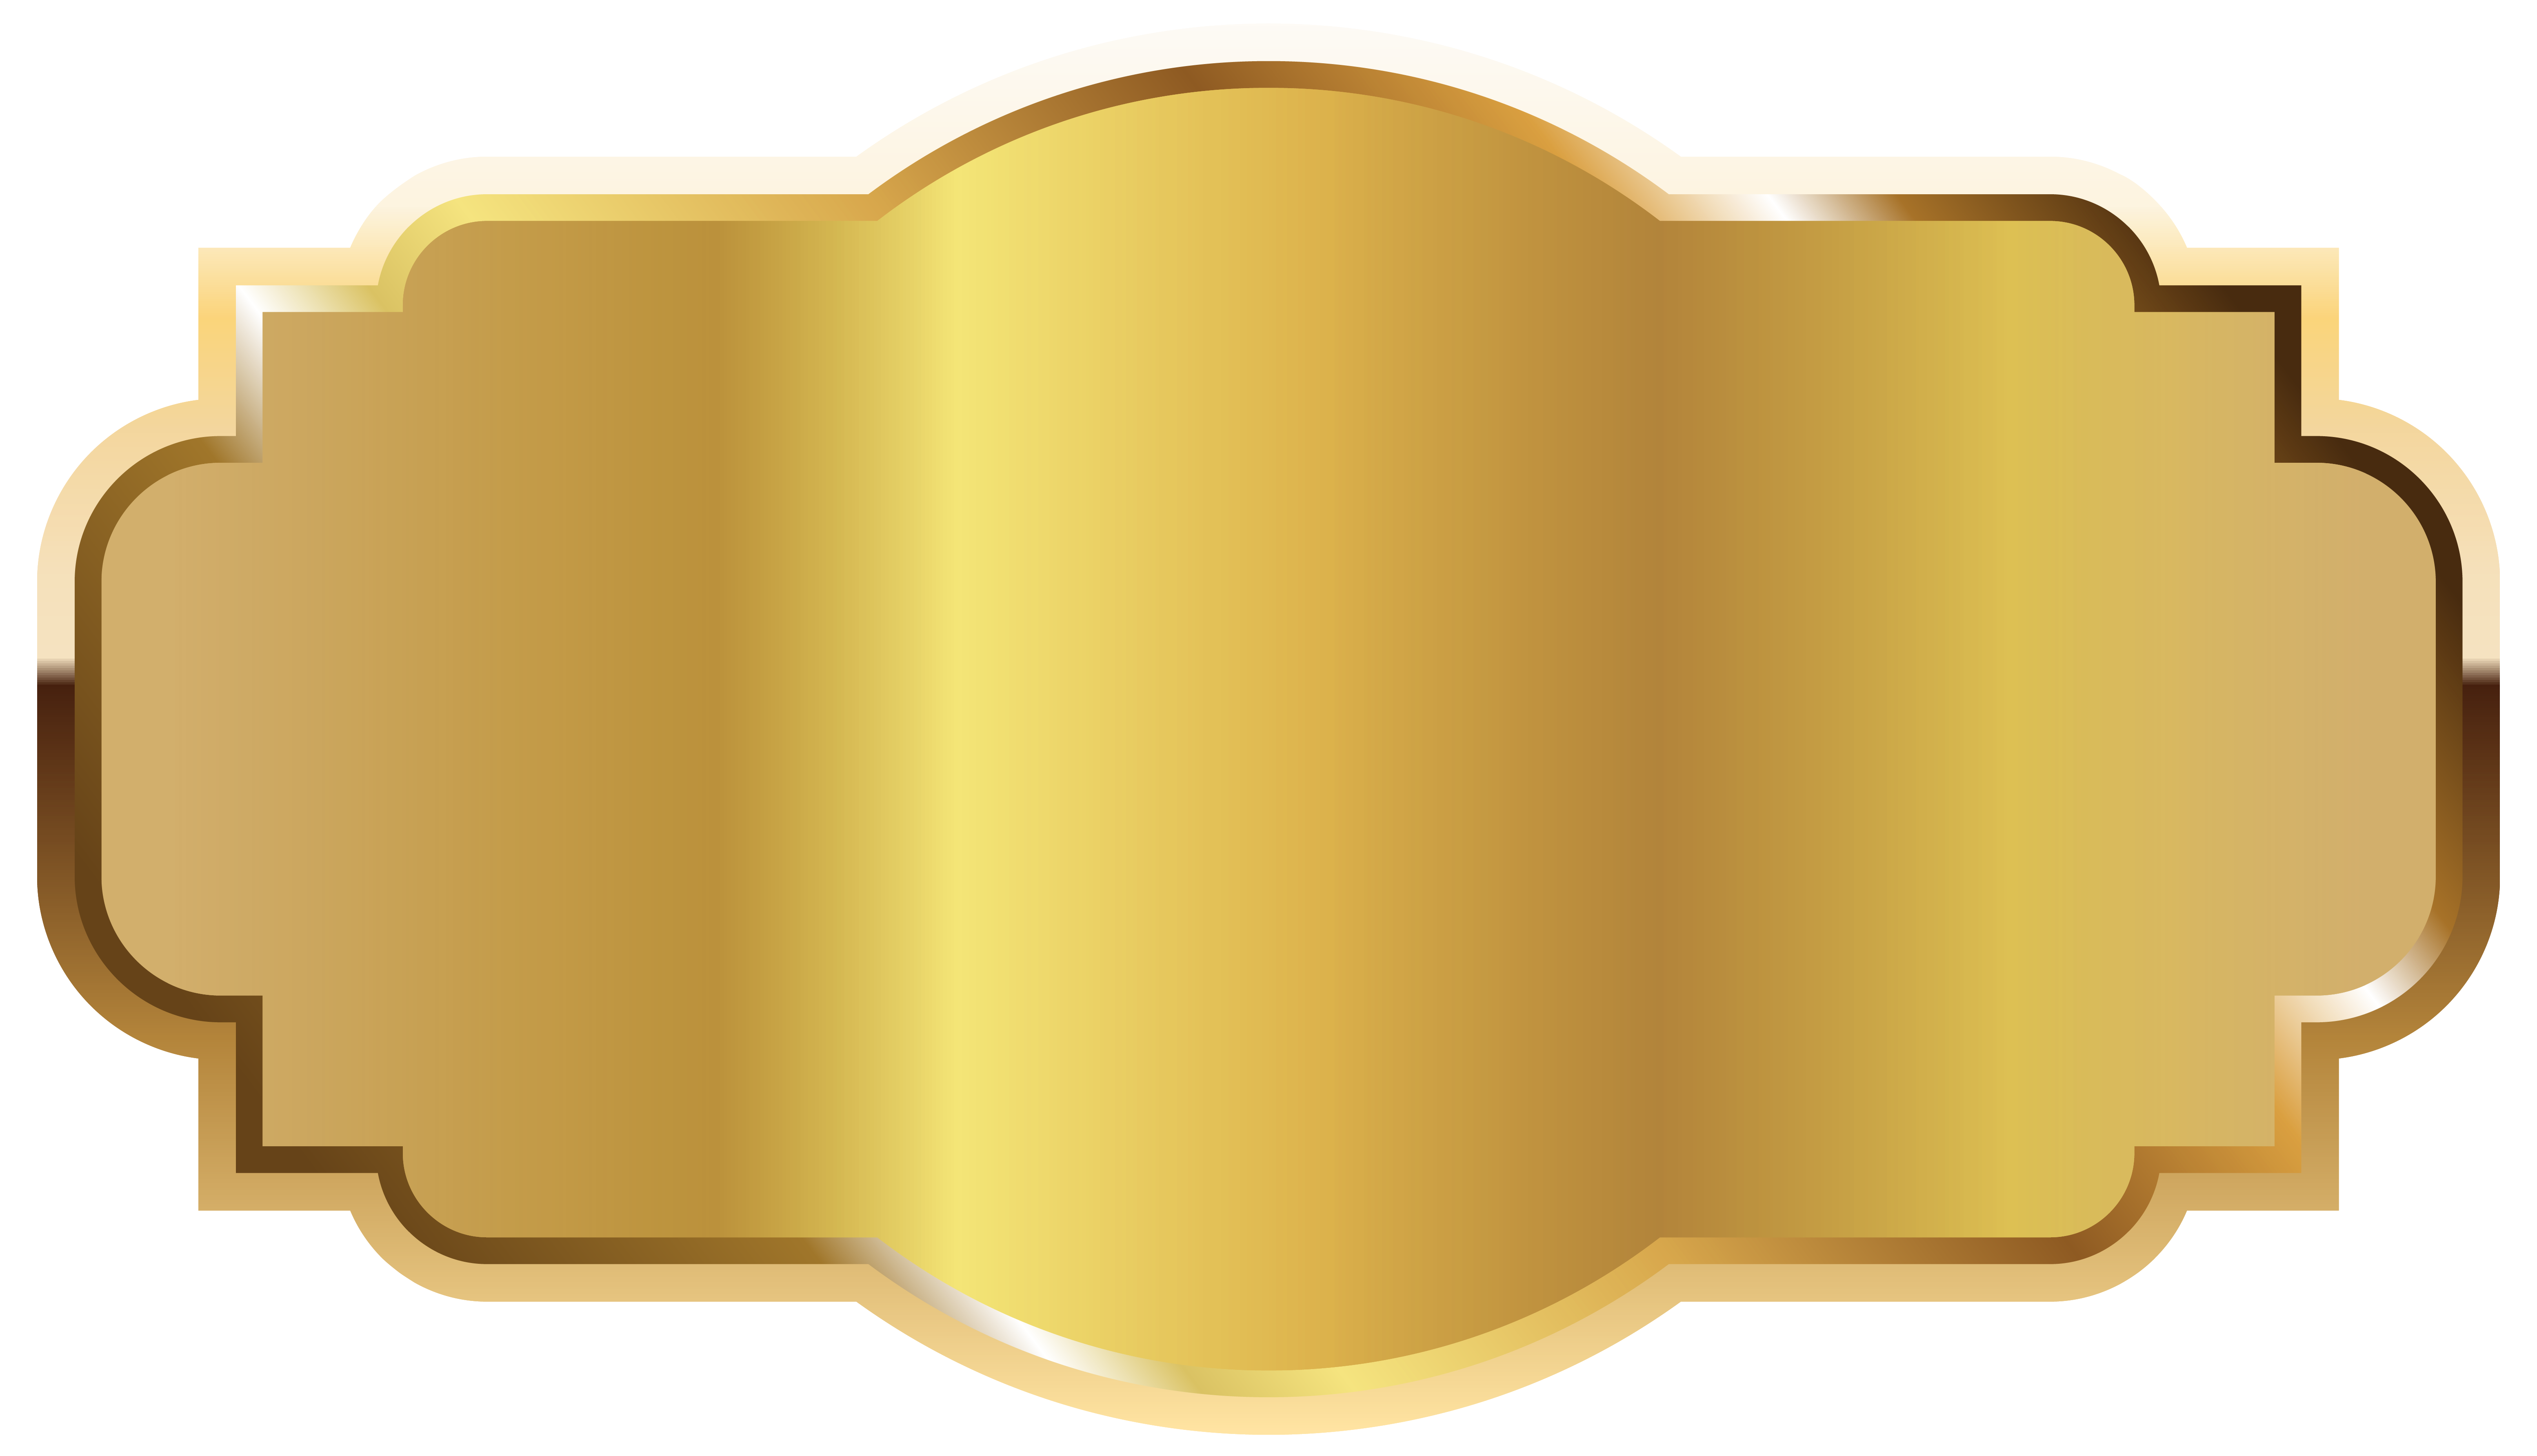 Gold_Label_Template_Clipart_PNG_Image